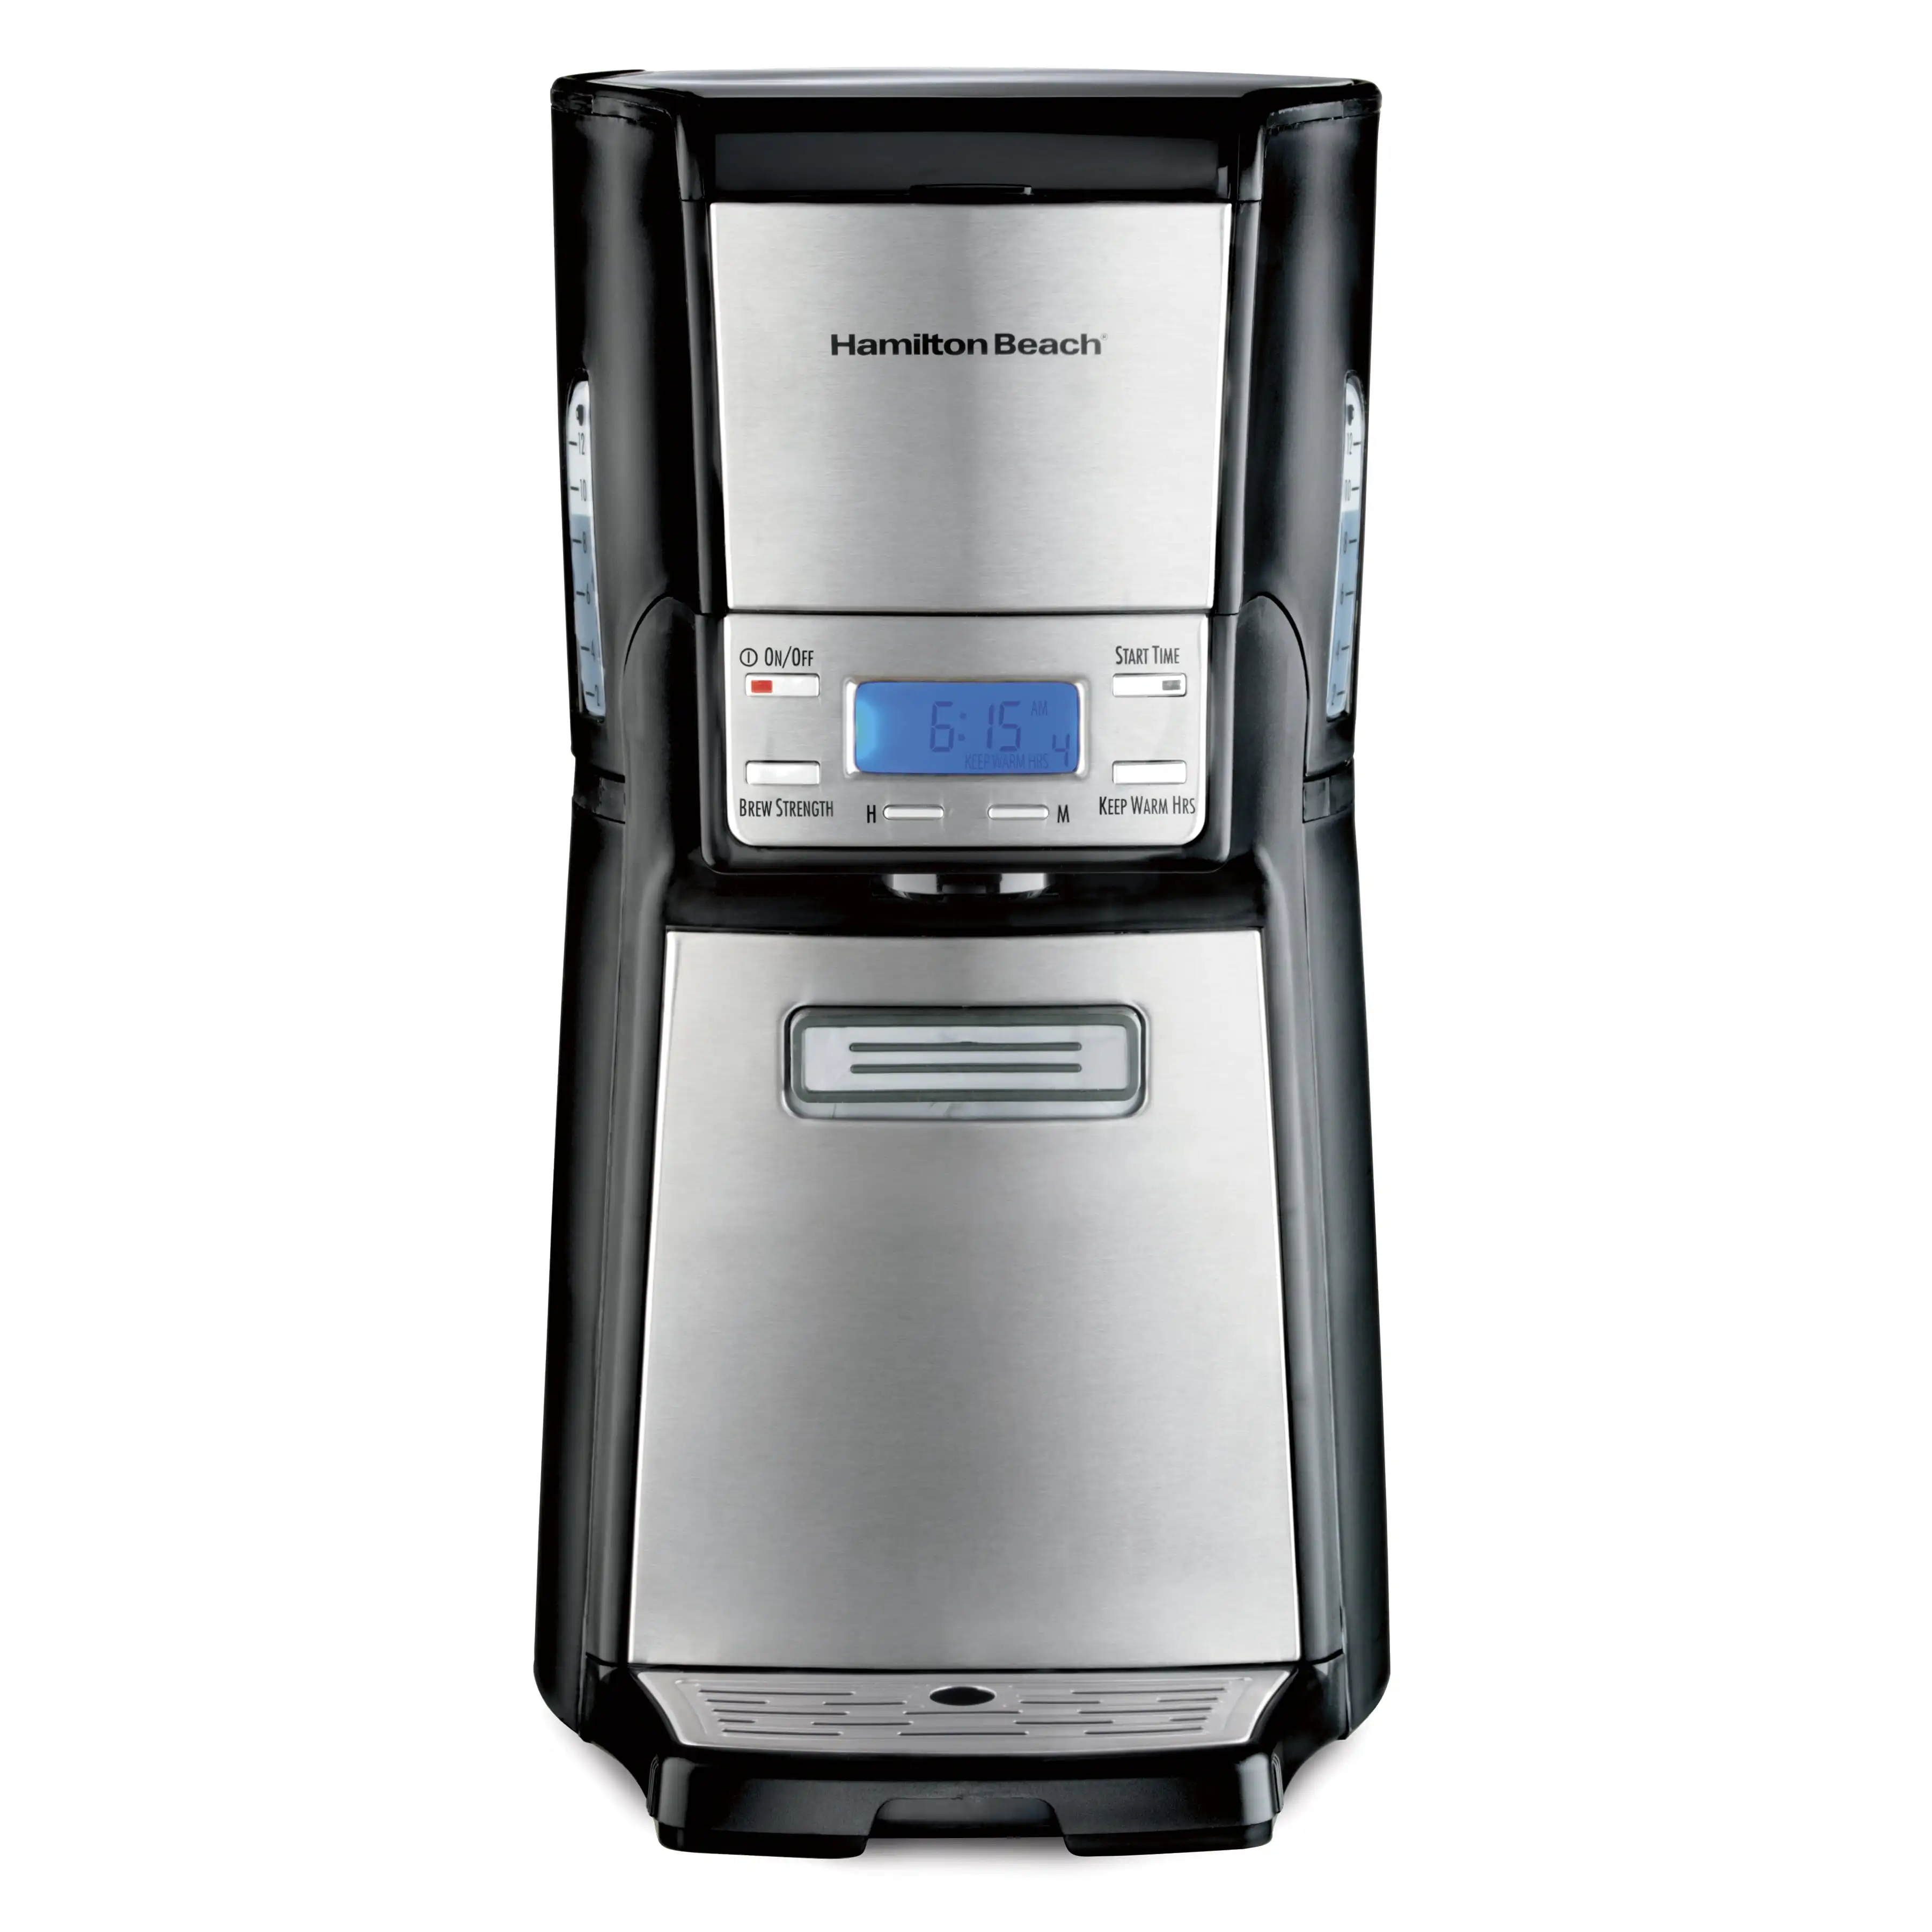 Brew Station 12 Cup Dispensing Coffeemaker, Stainless Steel and Black, Model 48465